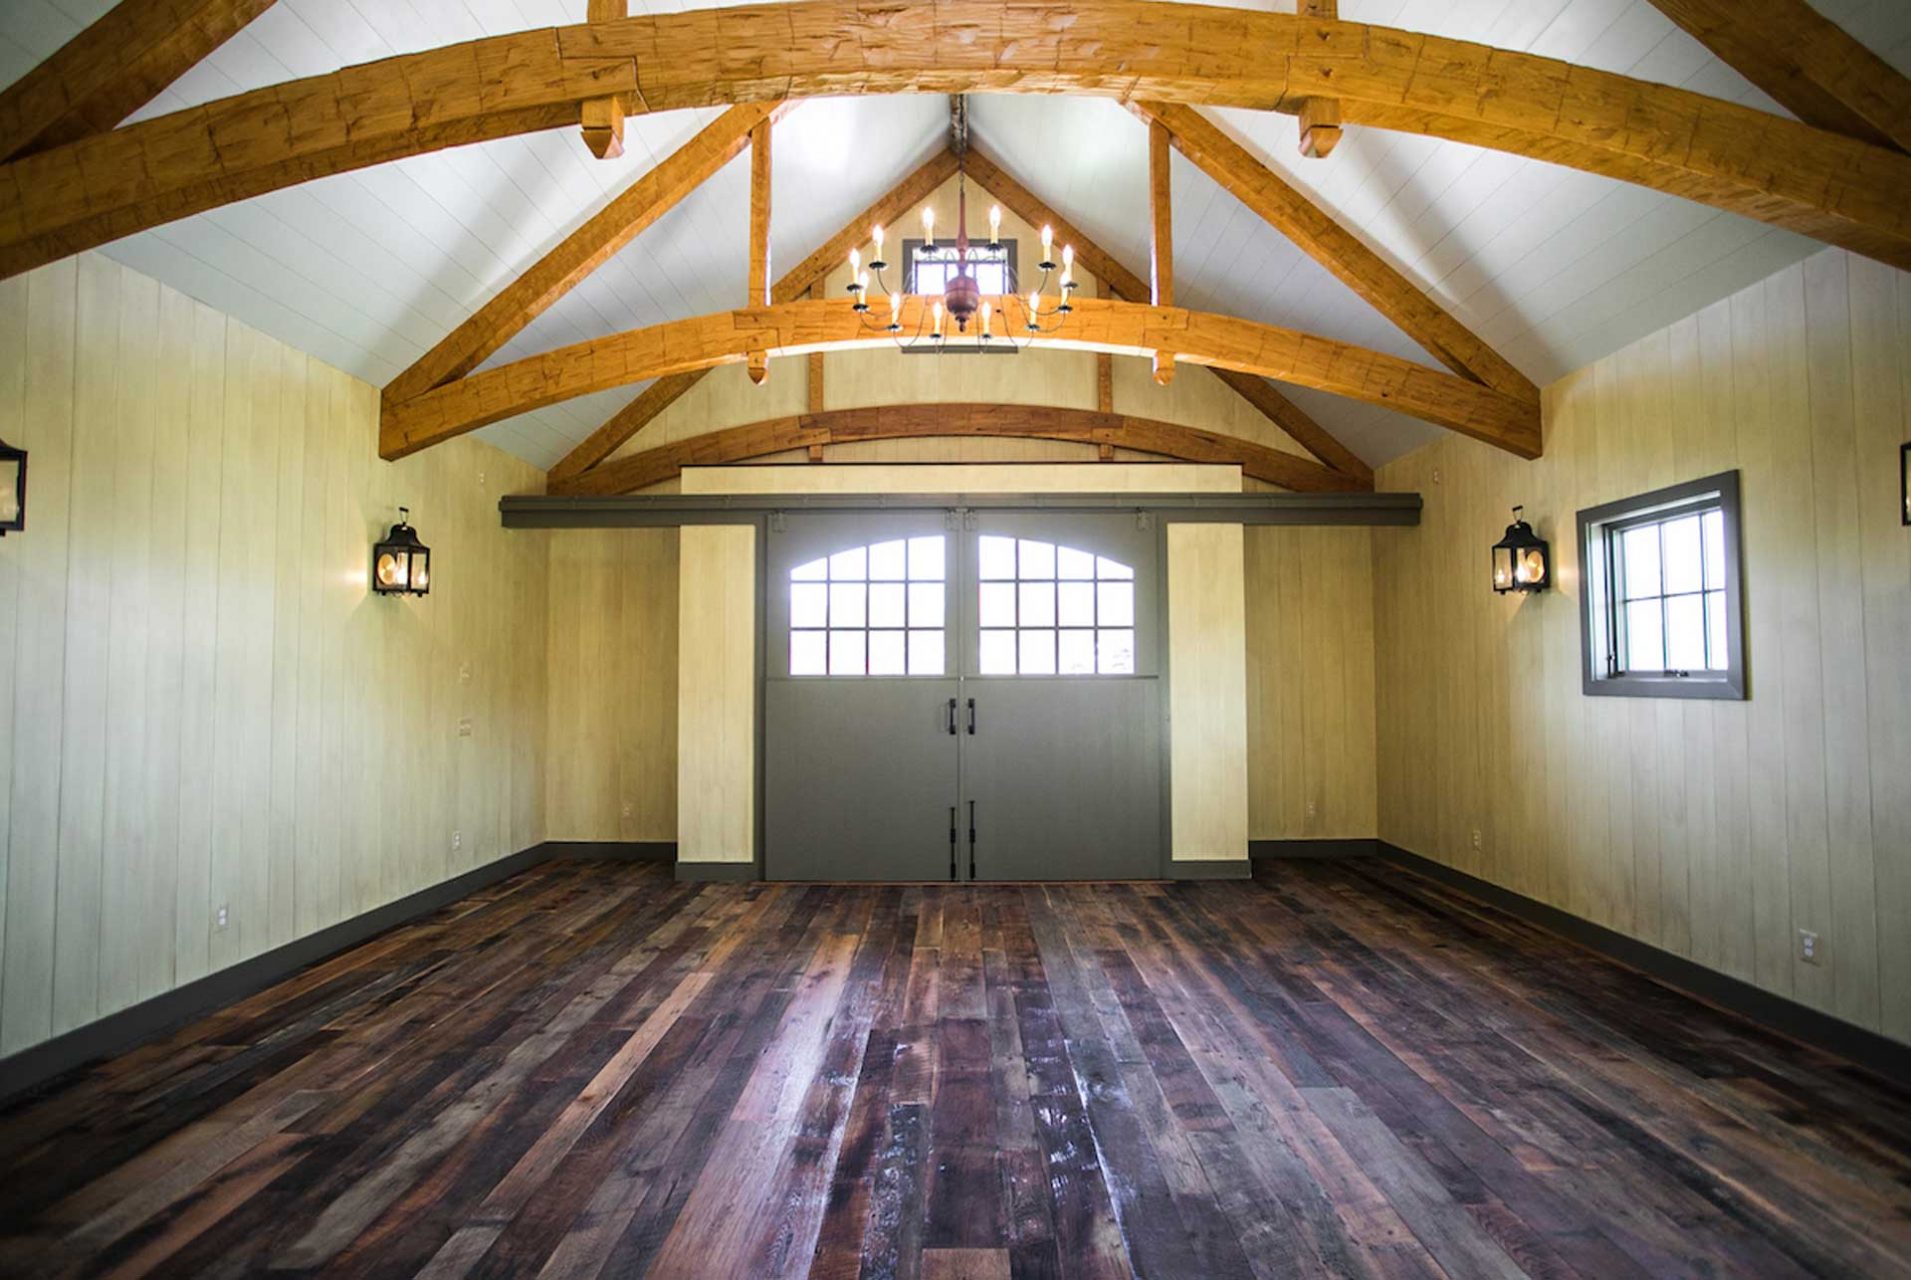 Modern Barn Flooring and Beams with Rustic Appeal